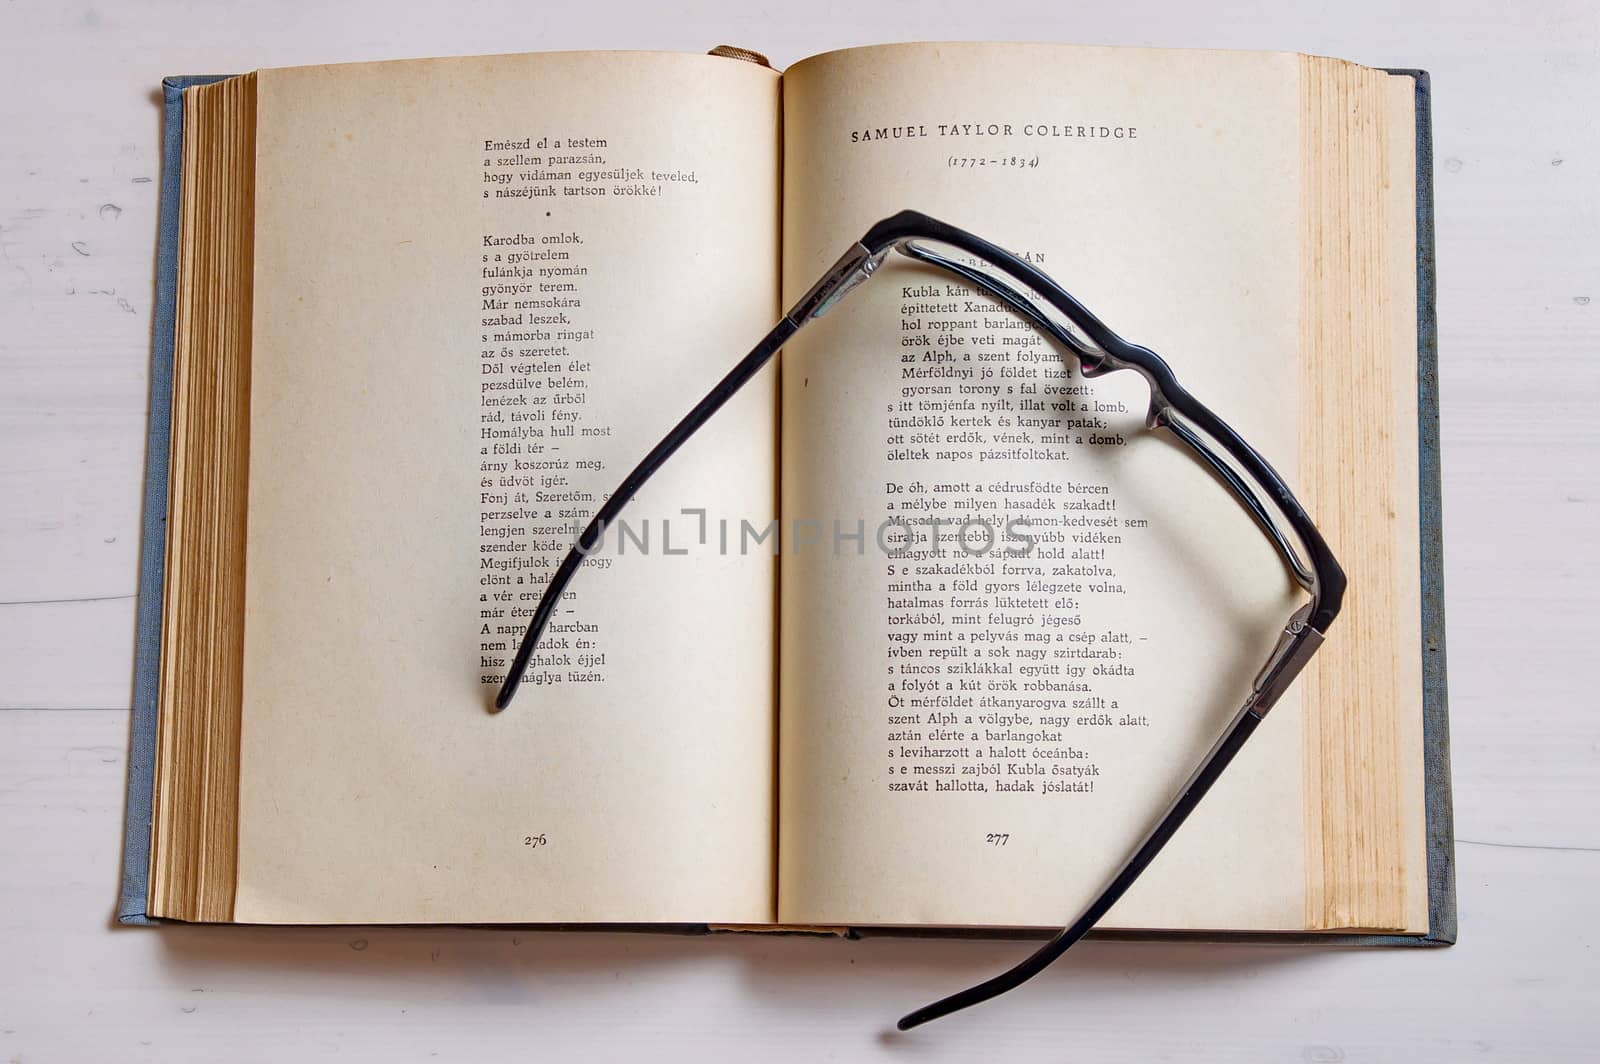 Reading glass on an old book